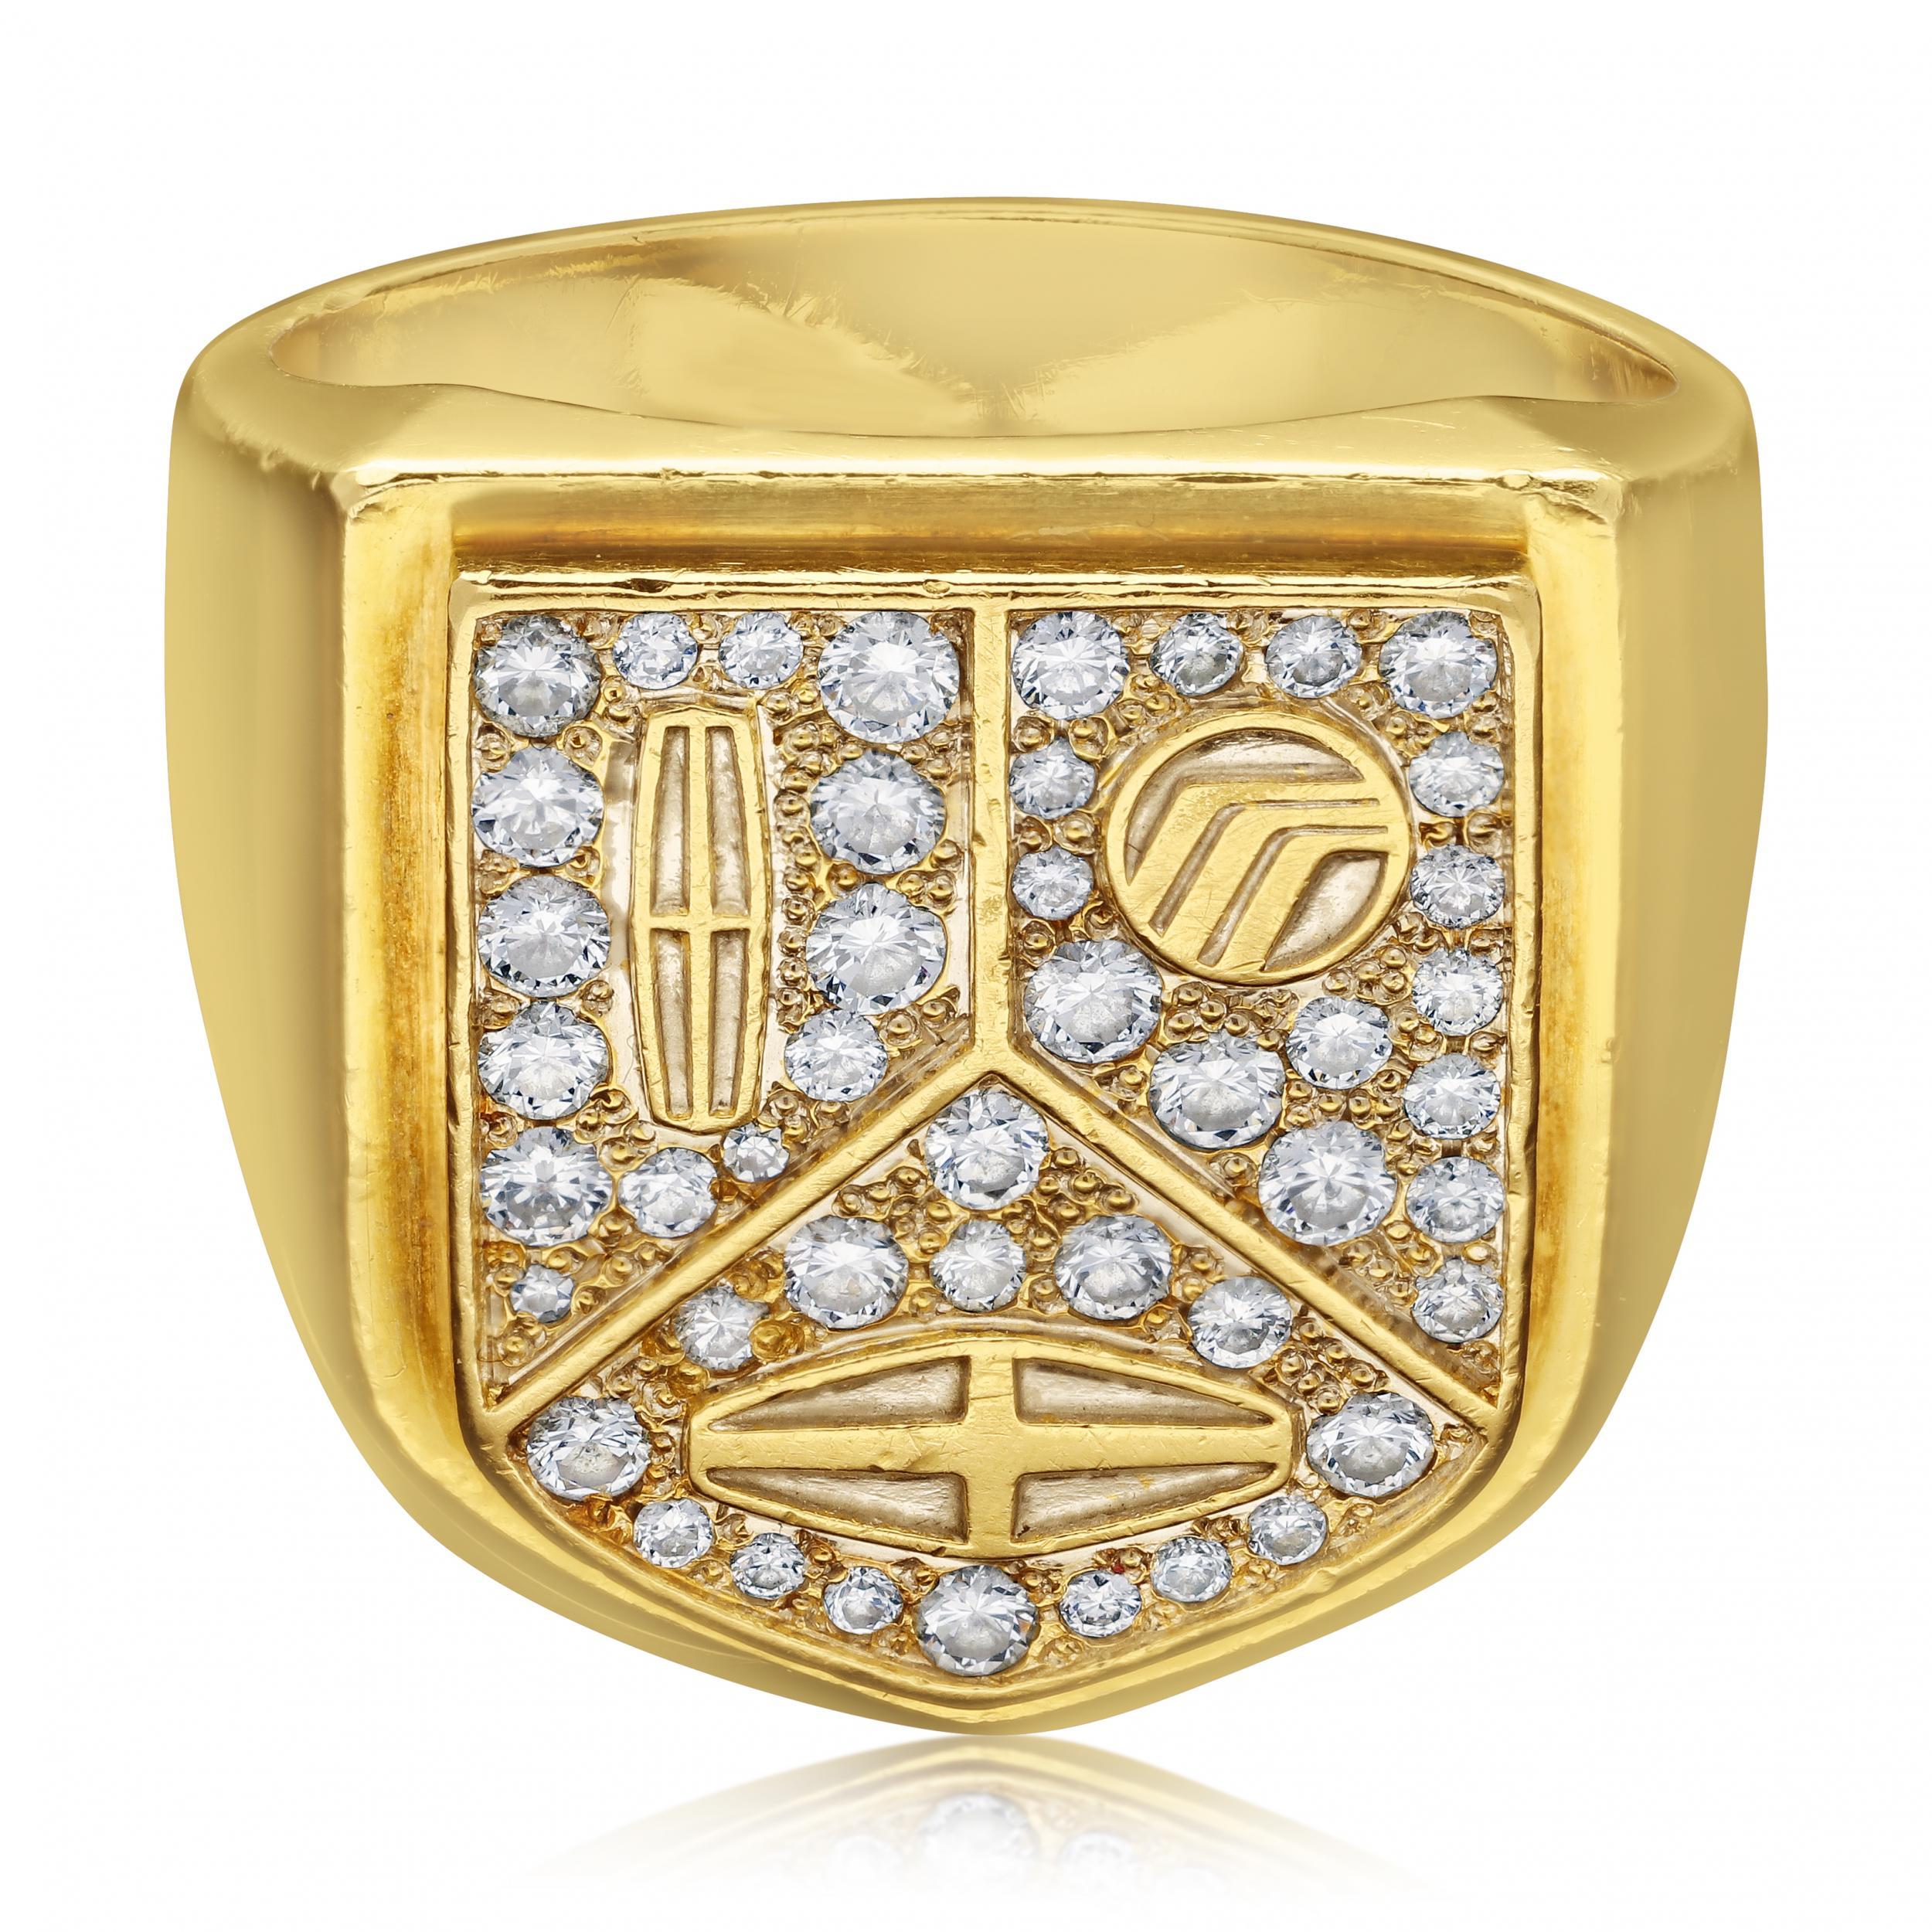 Description
A large heavy 18ct gold and diamond signet ring by Cartier c.1985, designed and made for the Lincoln Motor Company, the shield shaped head is divided into three parts each centred with the logo for either Lincoln, Mercury or Merkur cars,